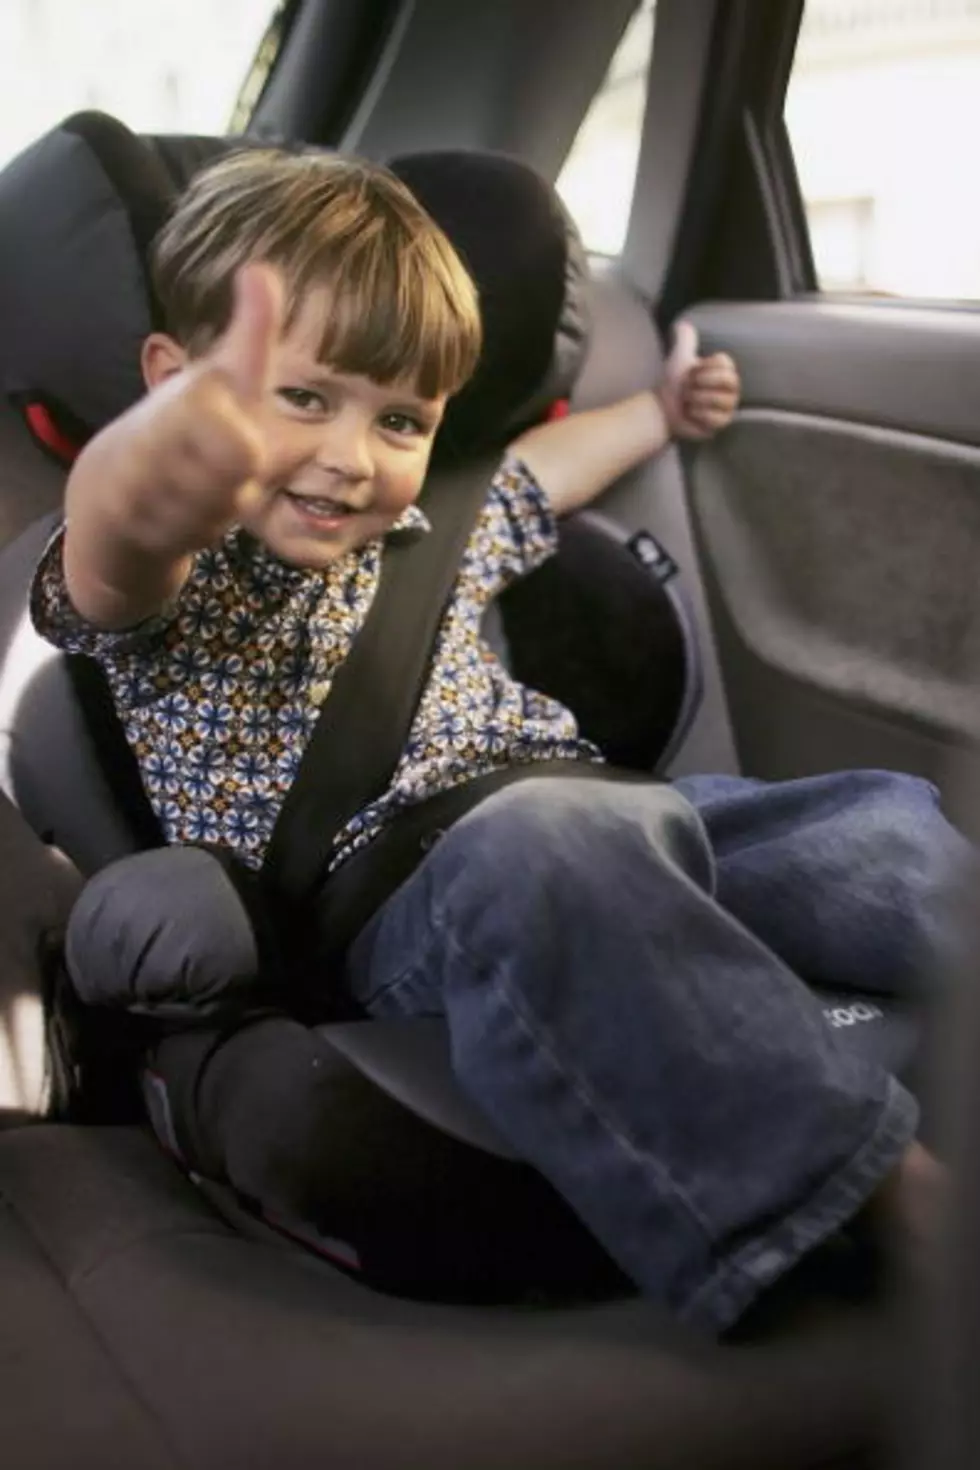 Kids Will Need To Stay In Rear-Facing Seats Until They’re 2